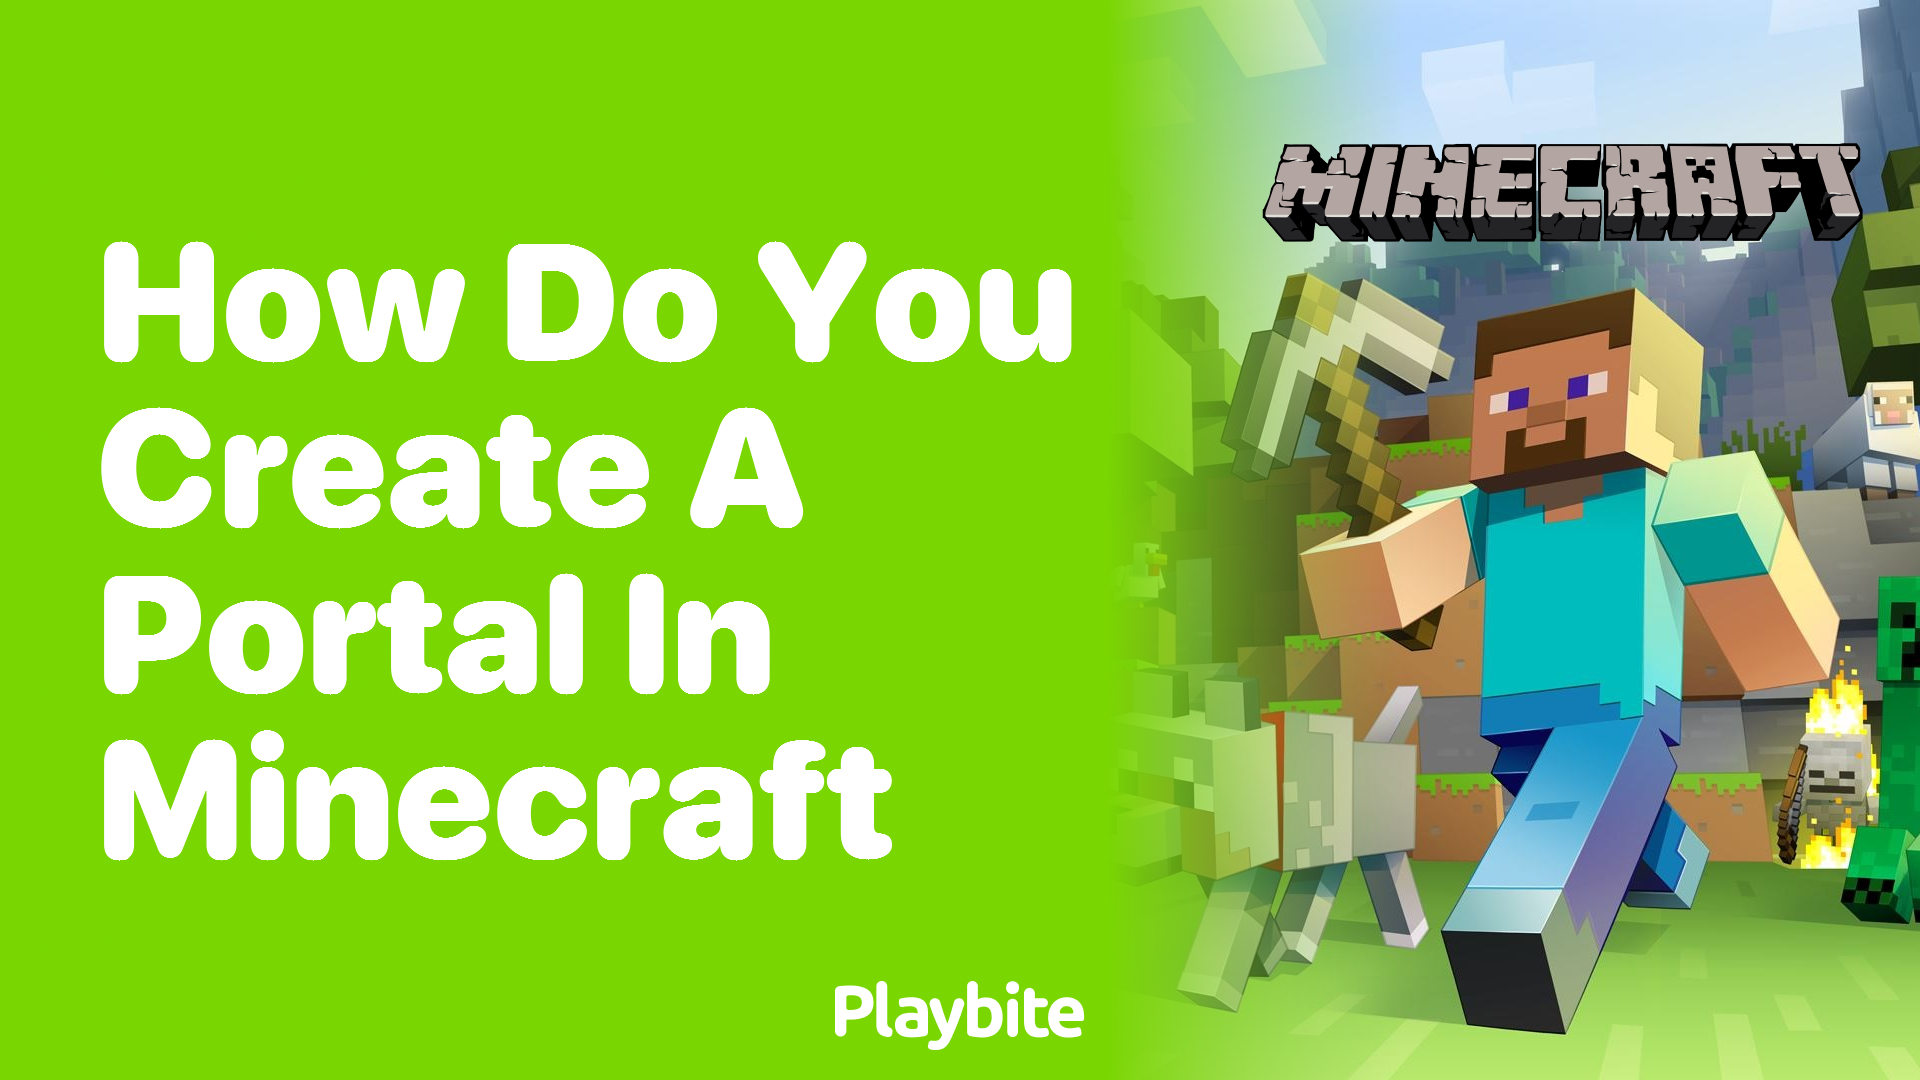 How Do You Create a Portal in Minecraft?